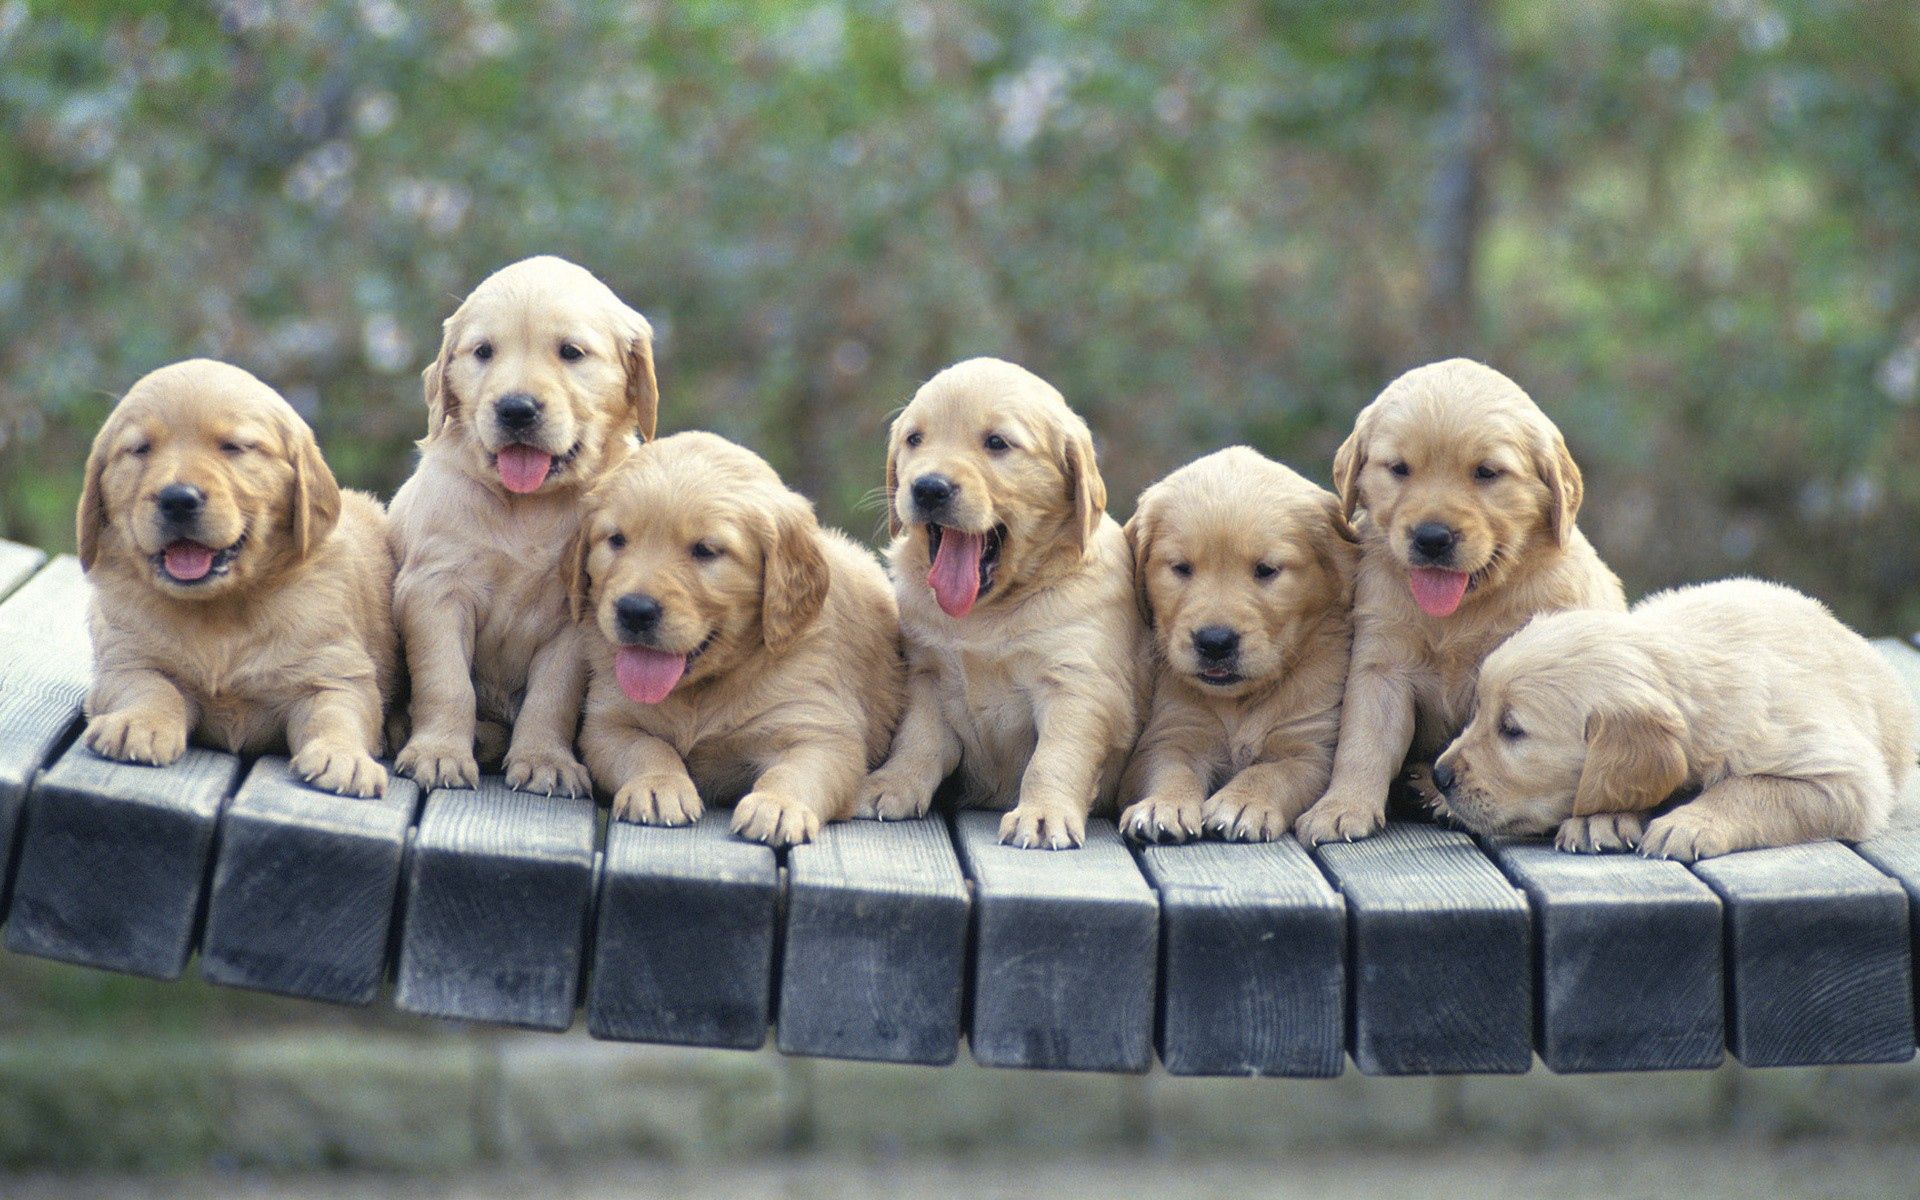 animals, multitude, puppies, dogs, lots of